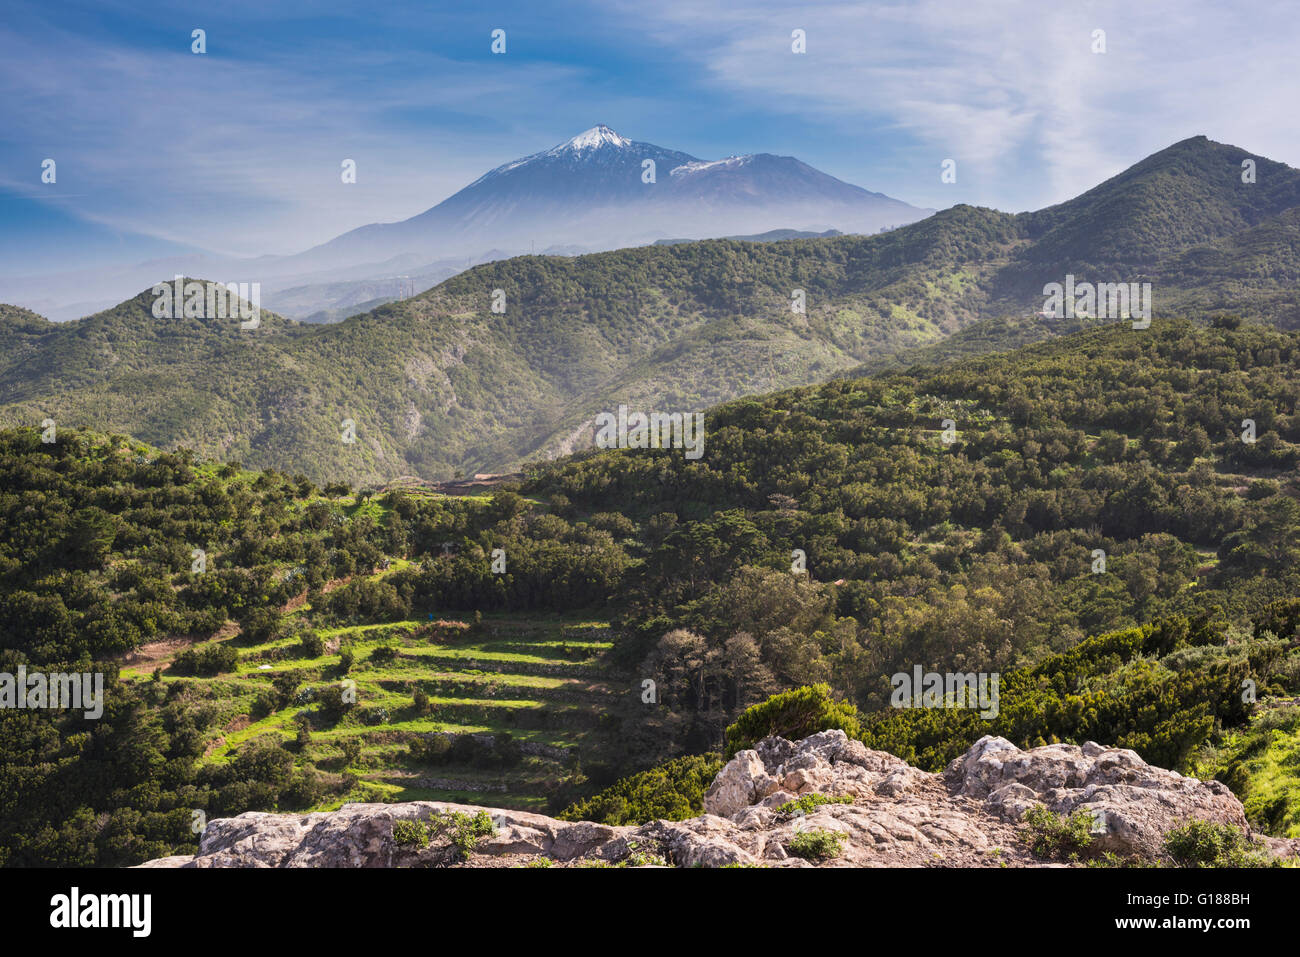 View towards Teide Volcano from Teno Alto, Tenerife, with spectacular cloud formations Stock Photo